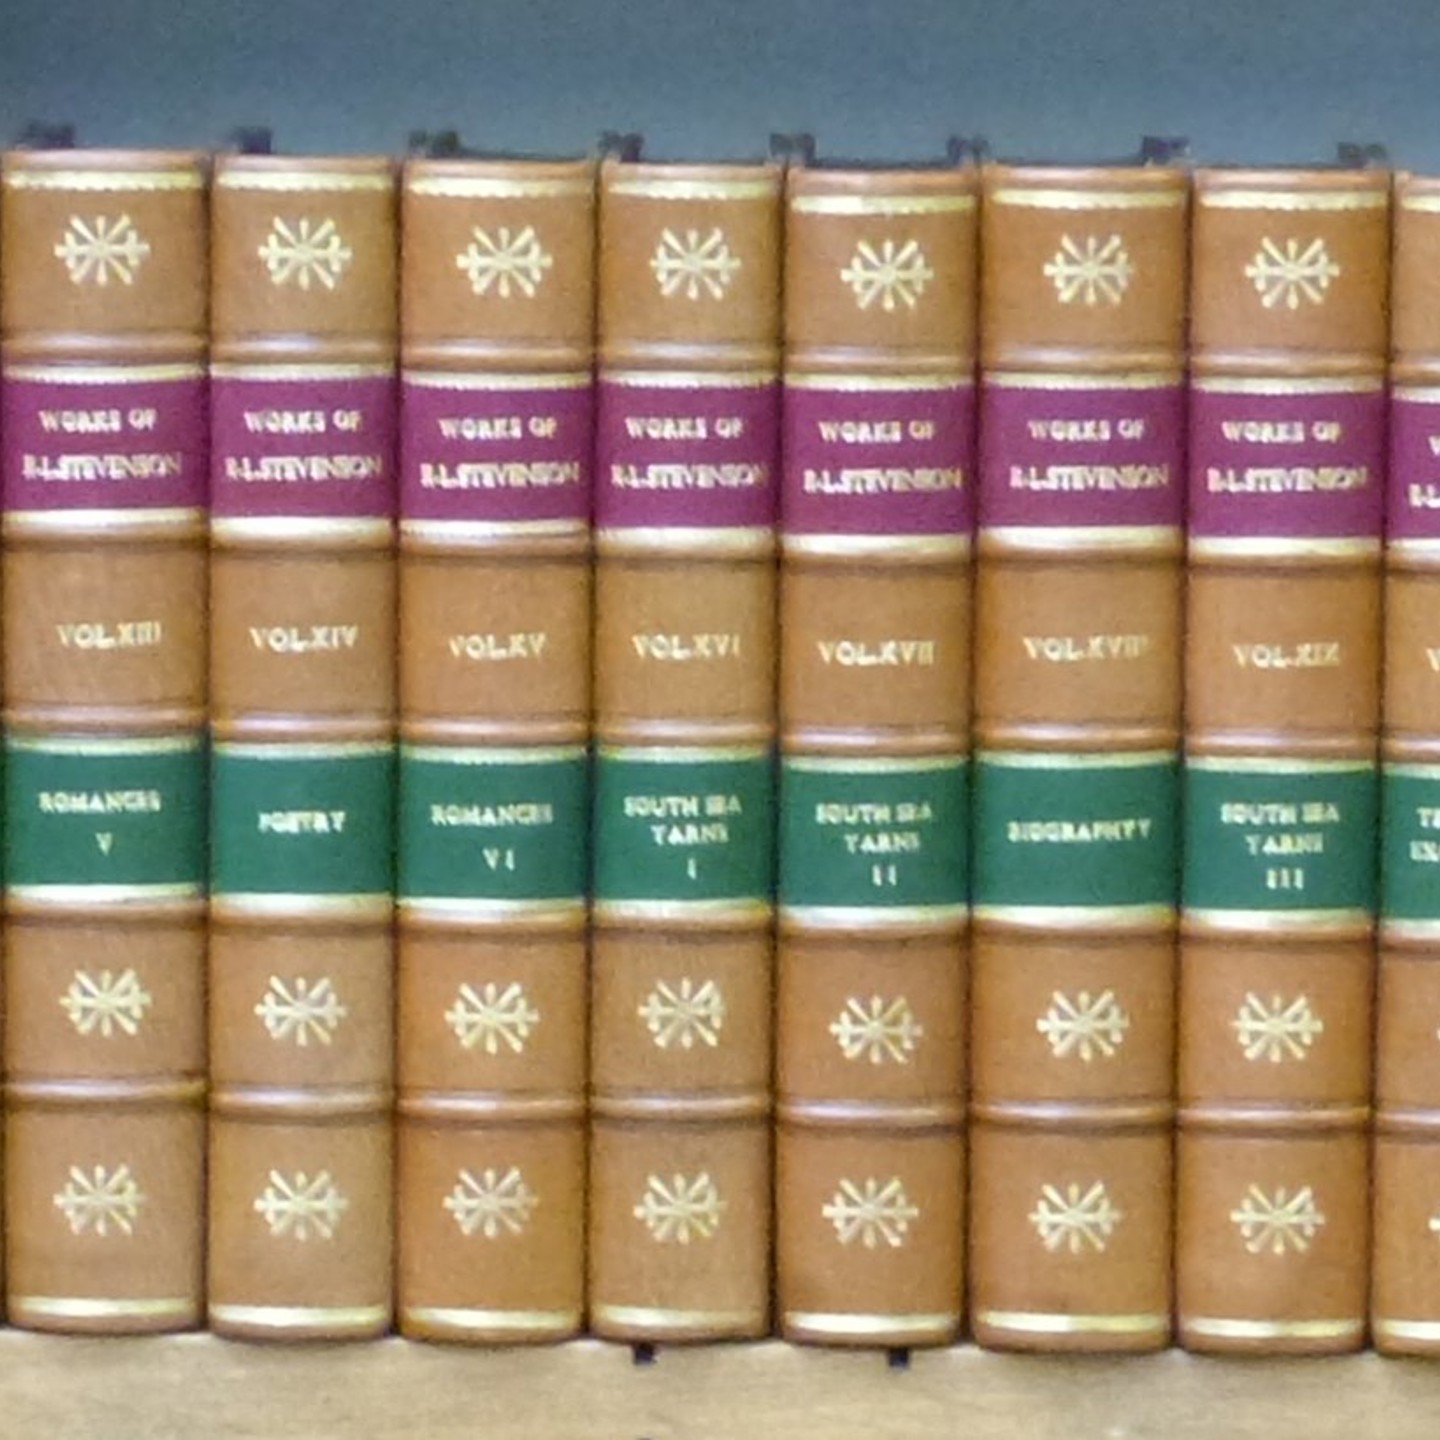 [BINDINGS] ROBERT LOUIS STEVENSON, Works. Publ. Constable, Edinburgh, 1894. 32 Vols. The Edinburgh Edition.Limited Edition Numbered Set This Being Number 454. Sold For £750